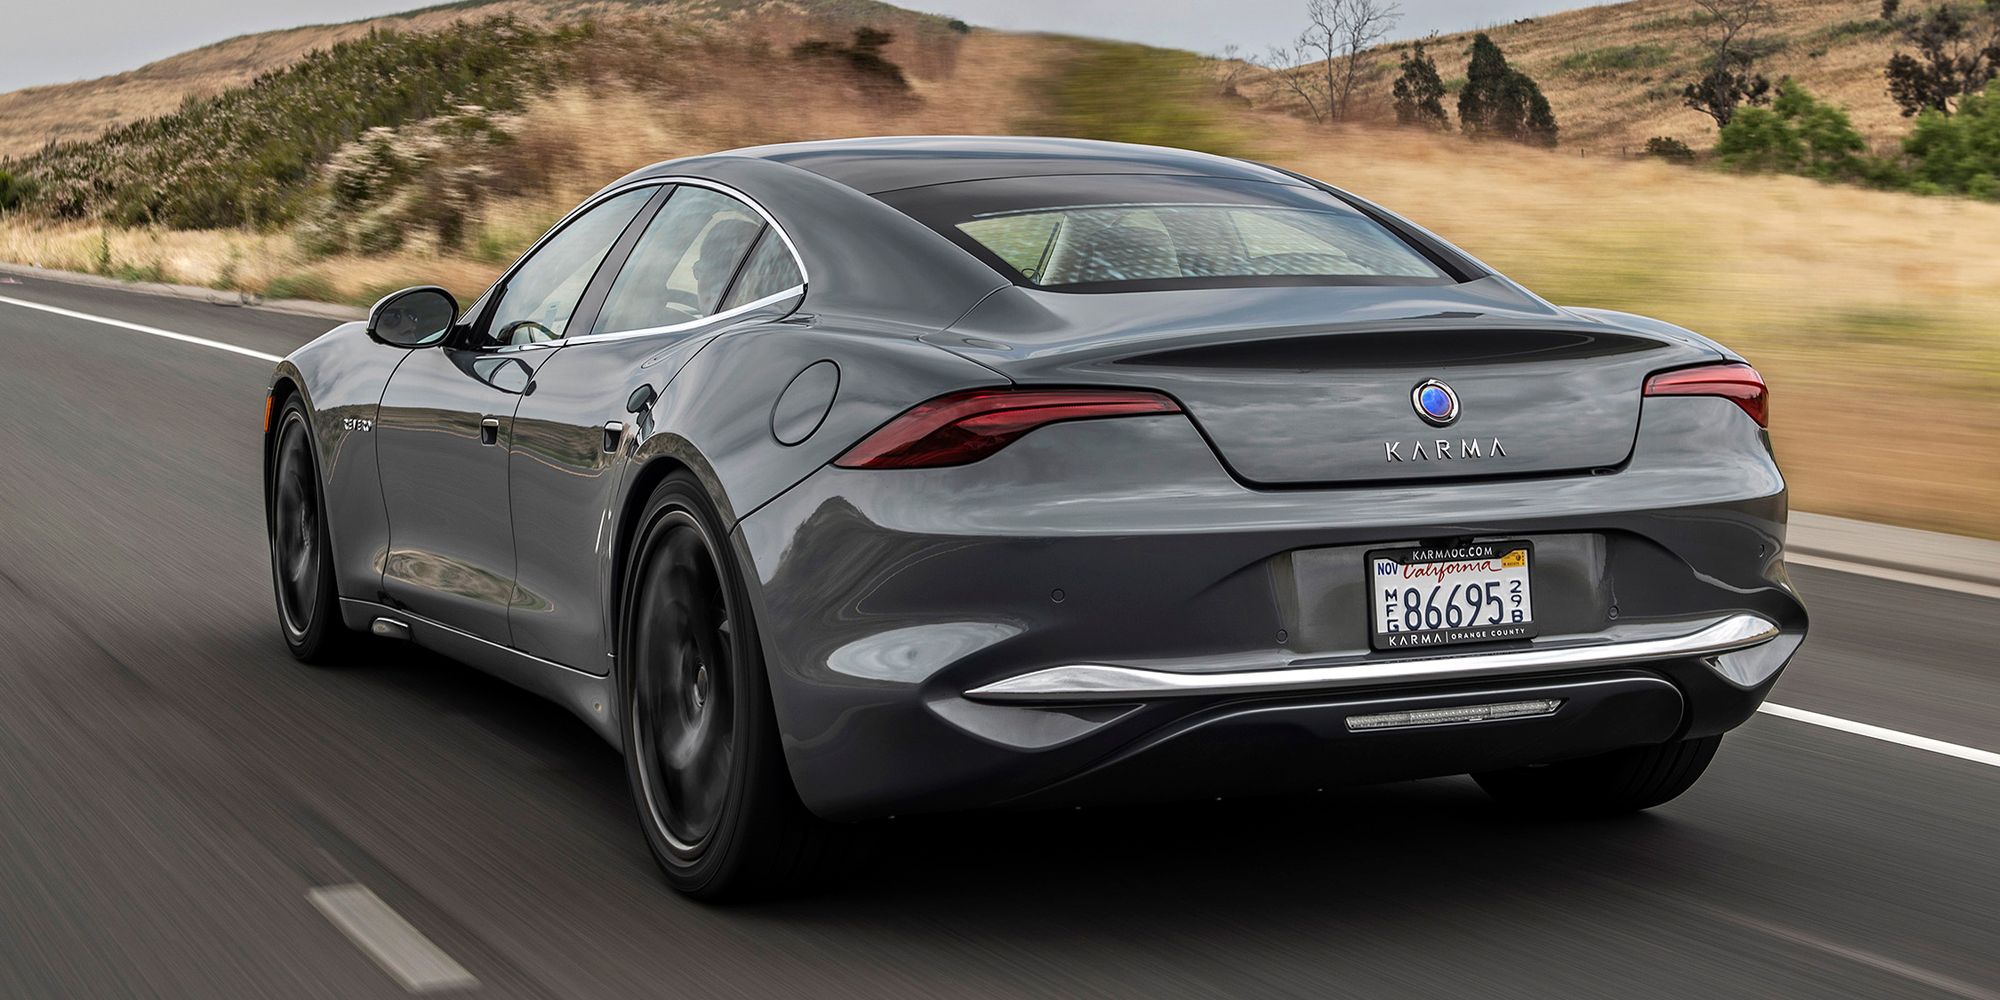 The rear of the Revero on the move